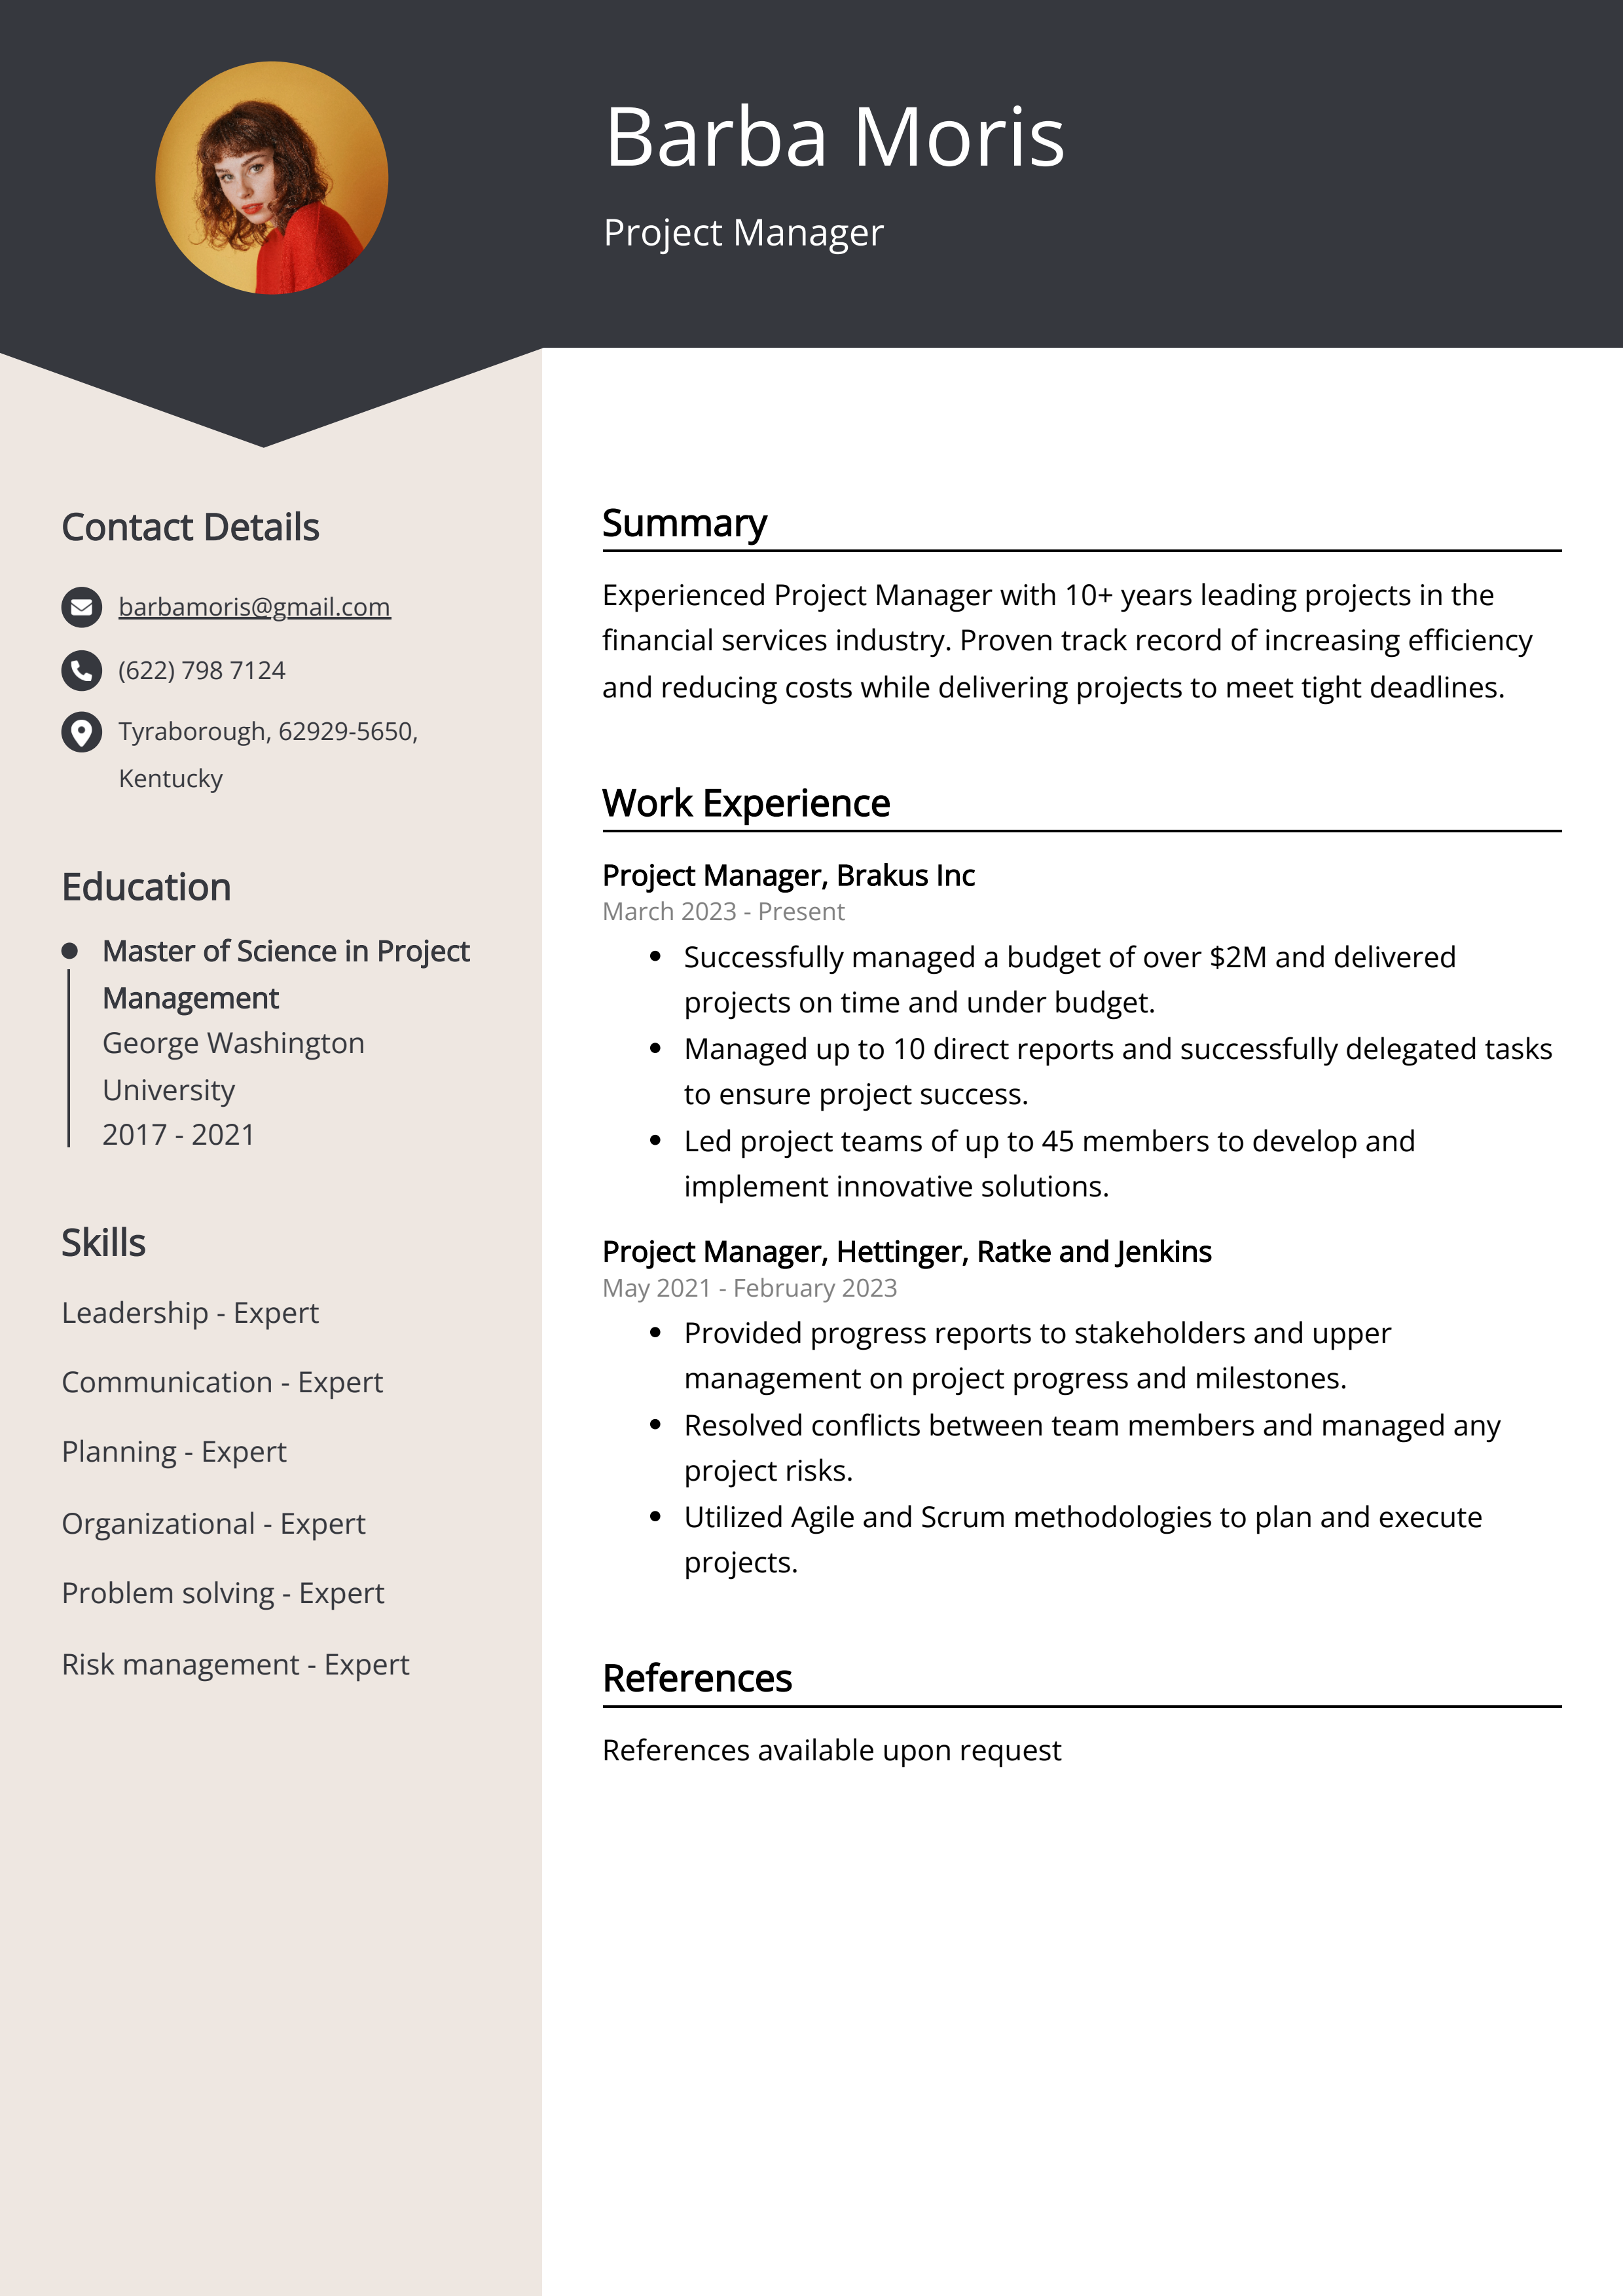 Project Manager CV Example